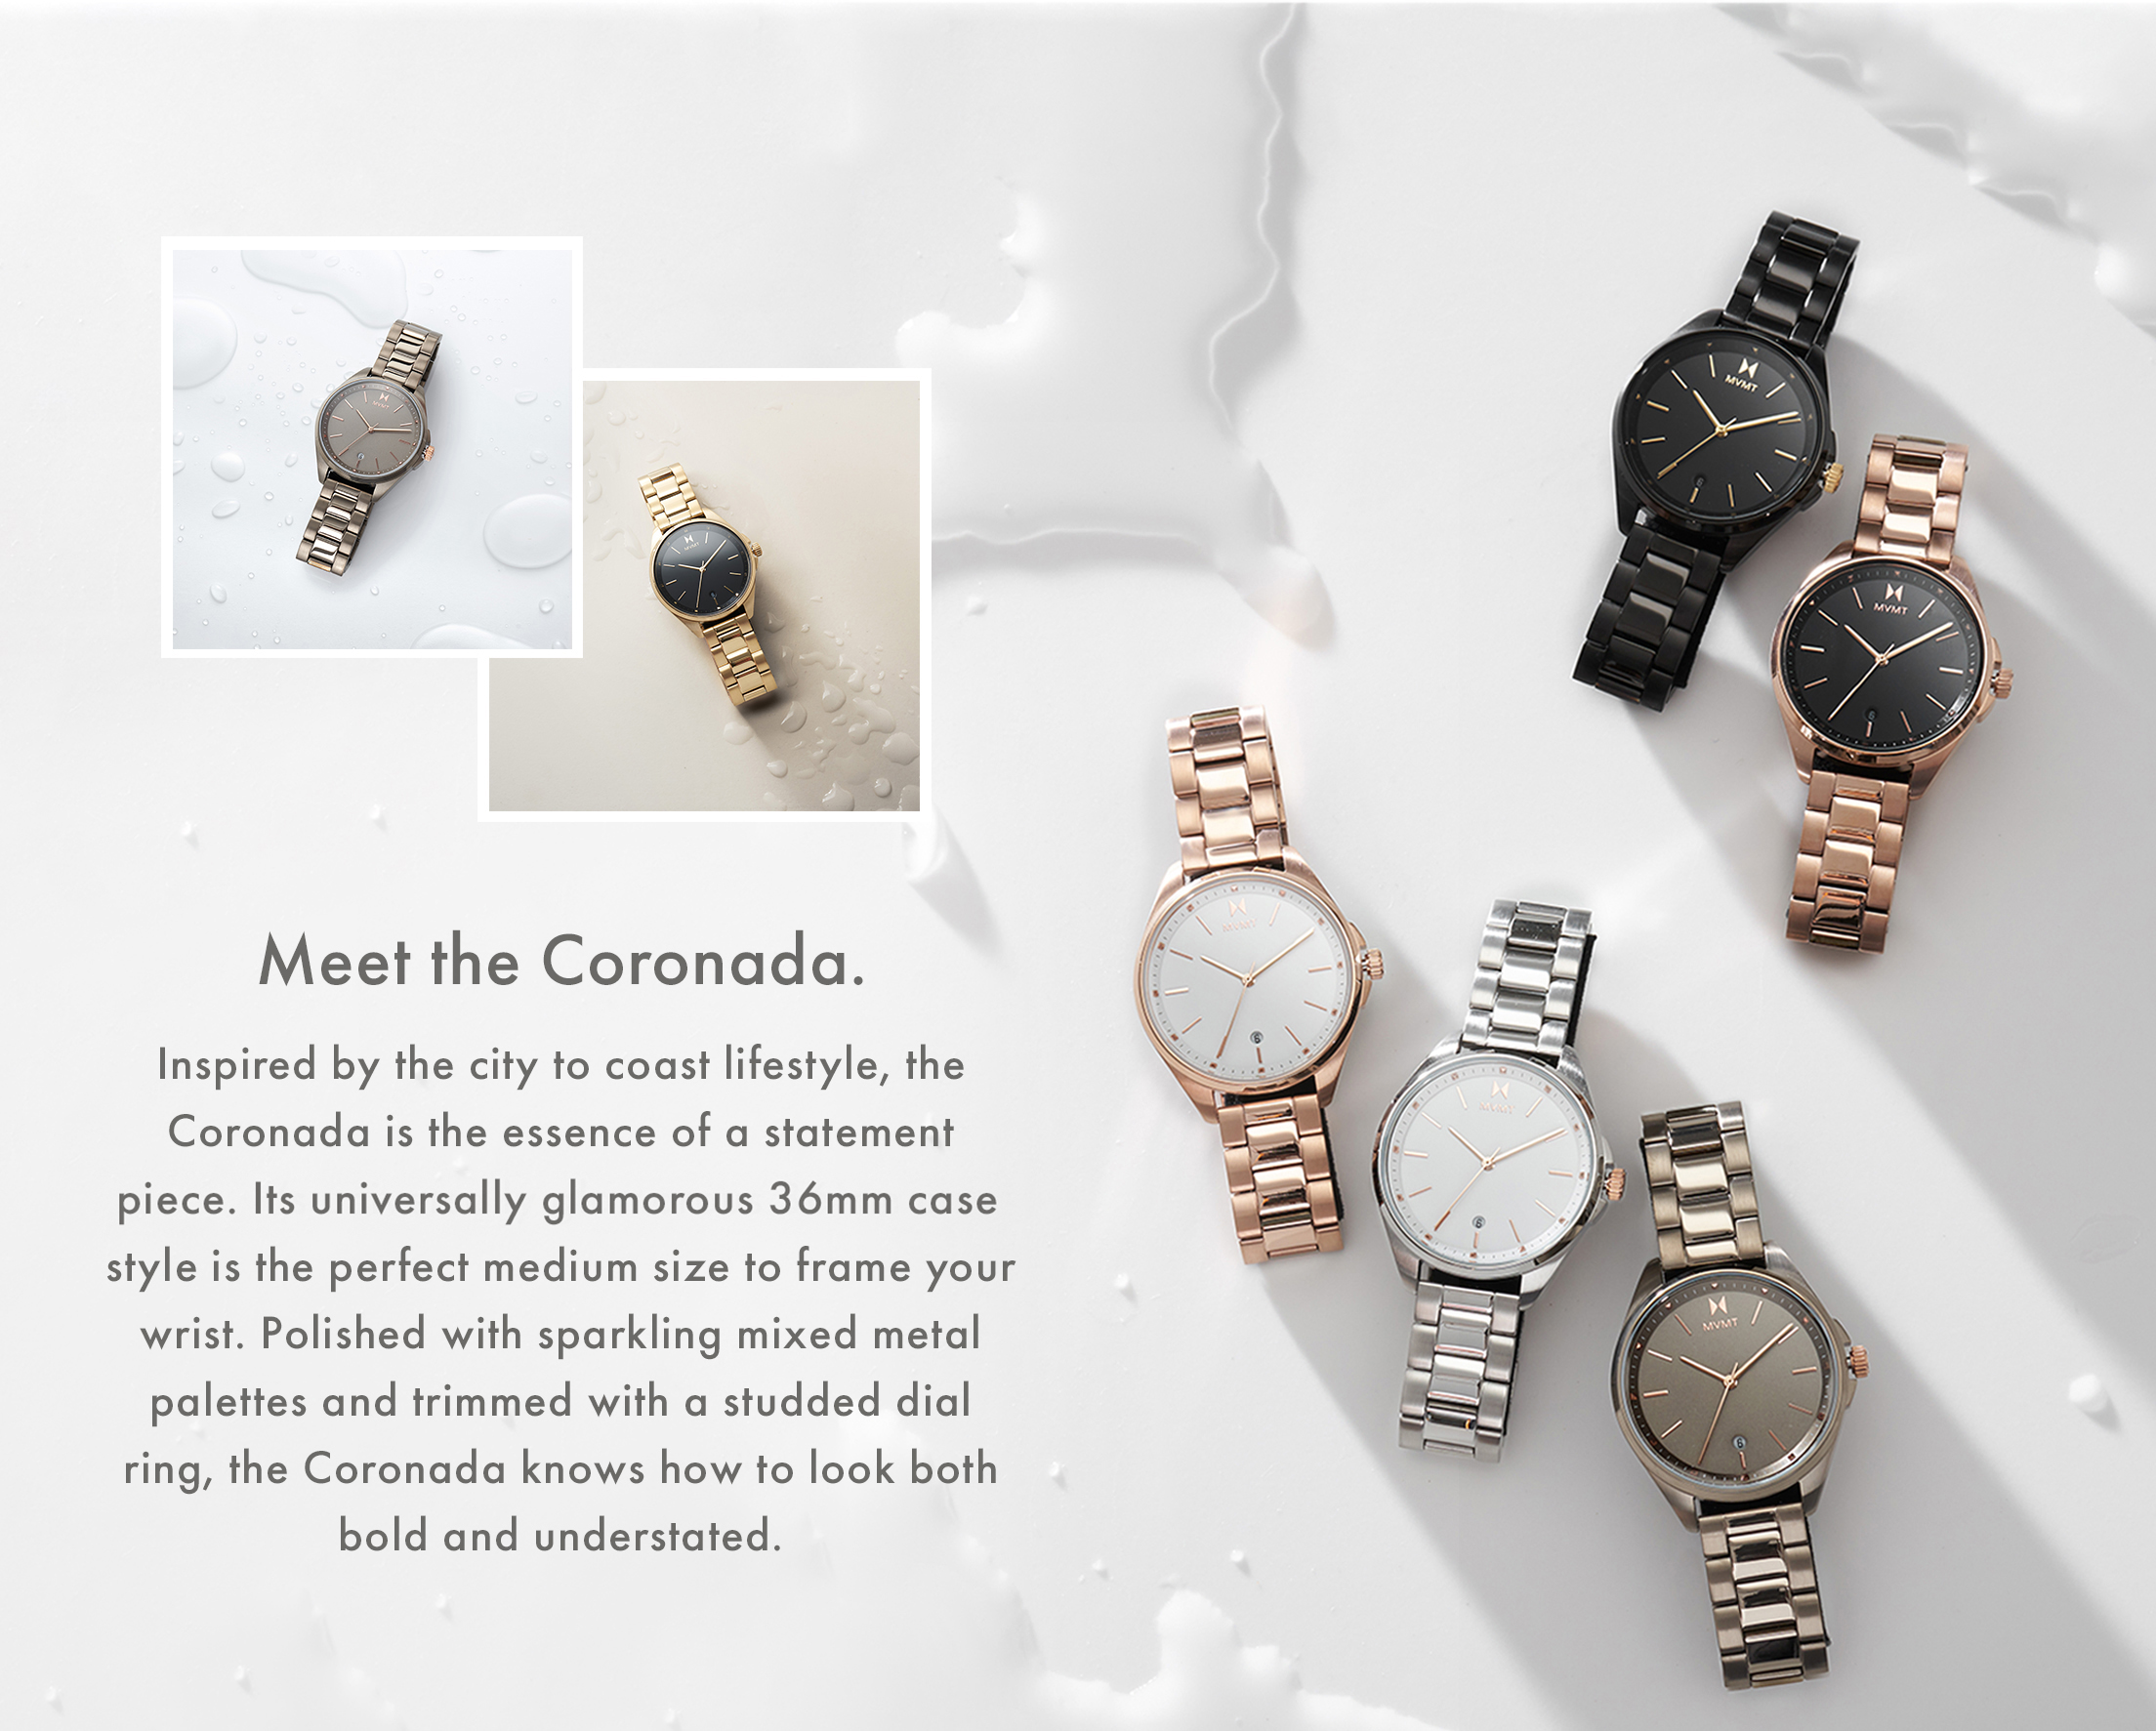 Meet the Coronada. Inspired by the city to coast lifestyle, the Coronada is the essence of a statement piece. Its universally glamorous 36mm case style is the perfect medium size to frame your wrist. Polished with sparkling mixed metal palettes and trimmed with a studded dial ring, the Coronada knows how to look both bold and understated.